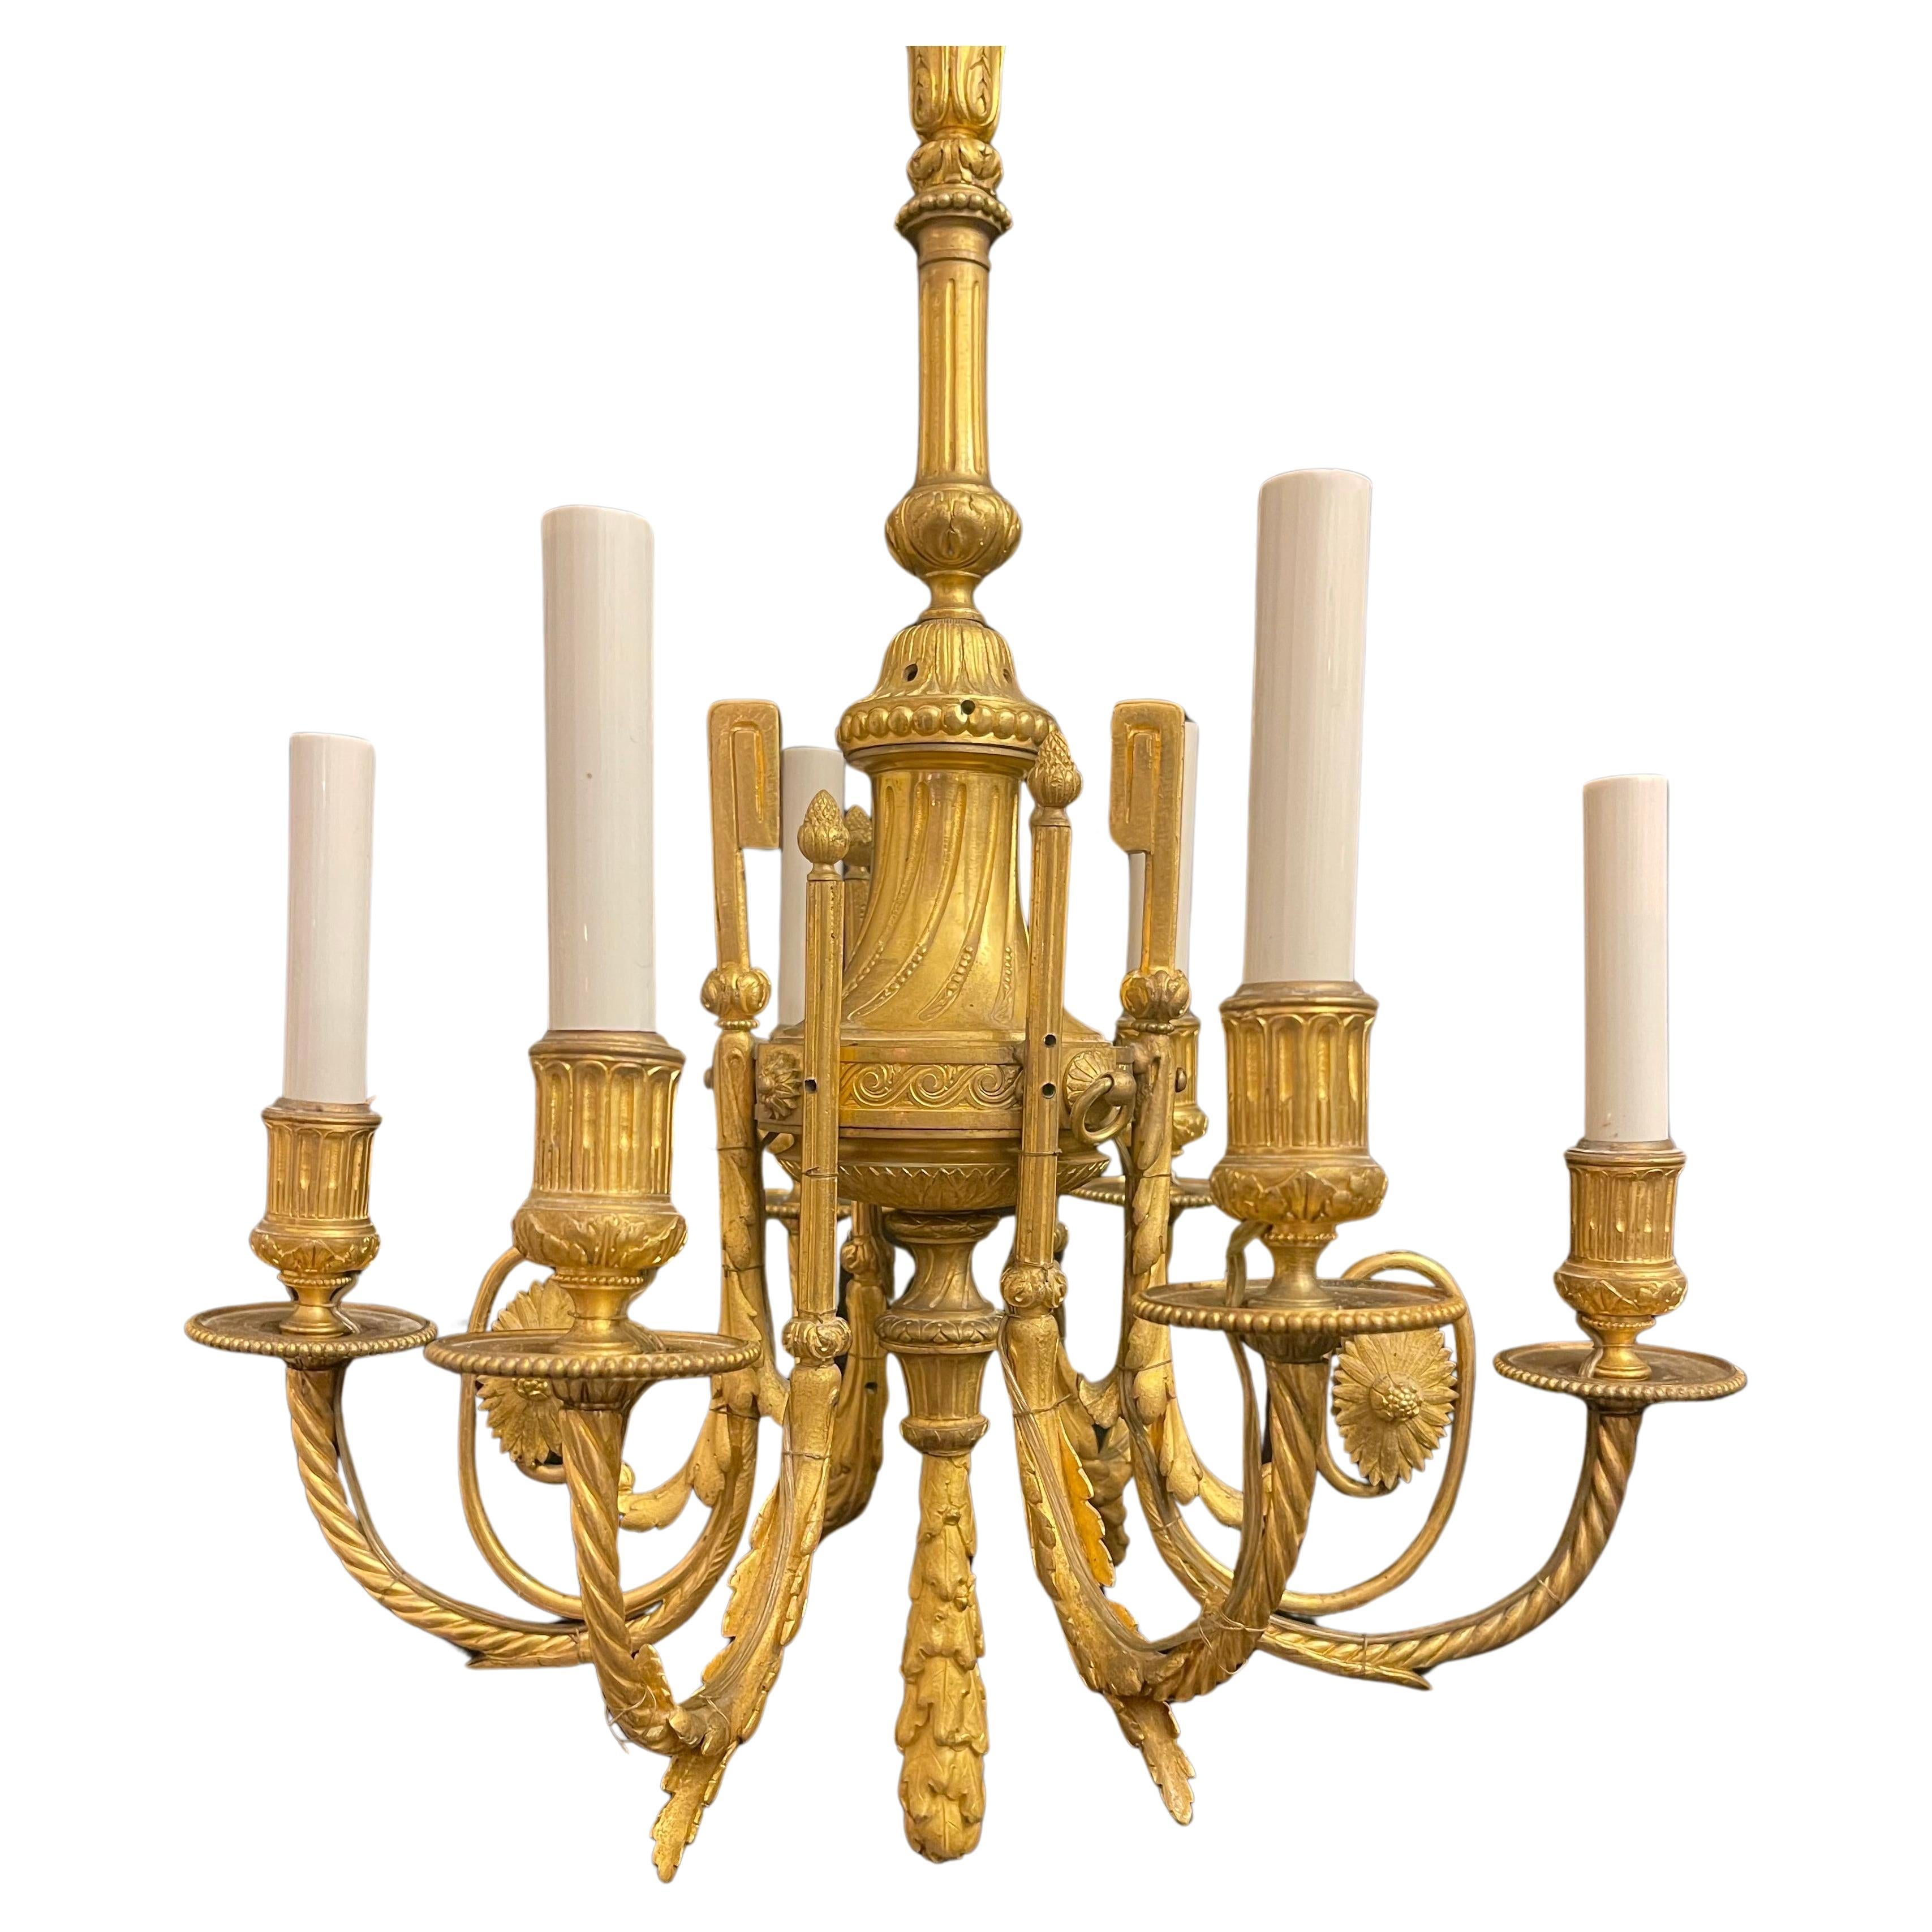 A Wonderful Pair Of French Petite Dore Bronze Urn Form Regency / Neoclassical 6 Candelabra Light Chandeliers 
Wiring Up To Date
They Come With Chain, Canopy And Mounting Hardware For Installation